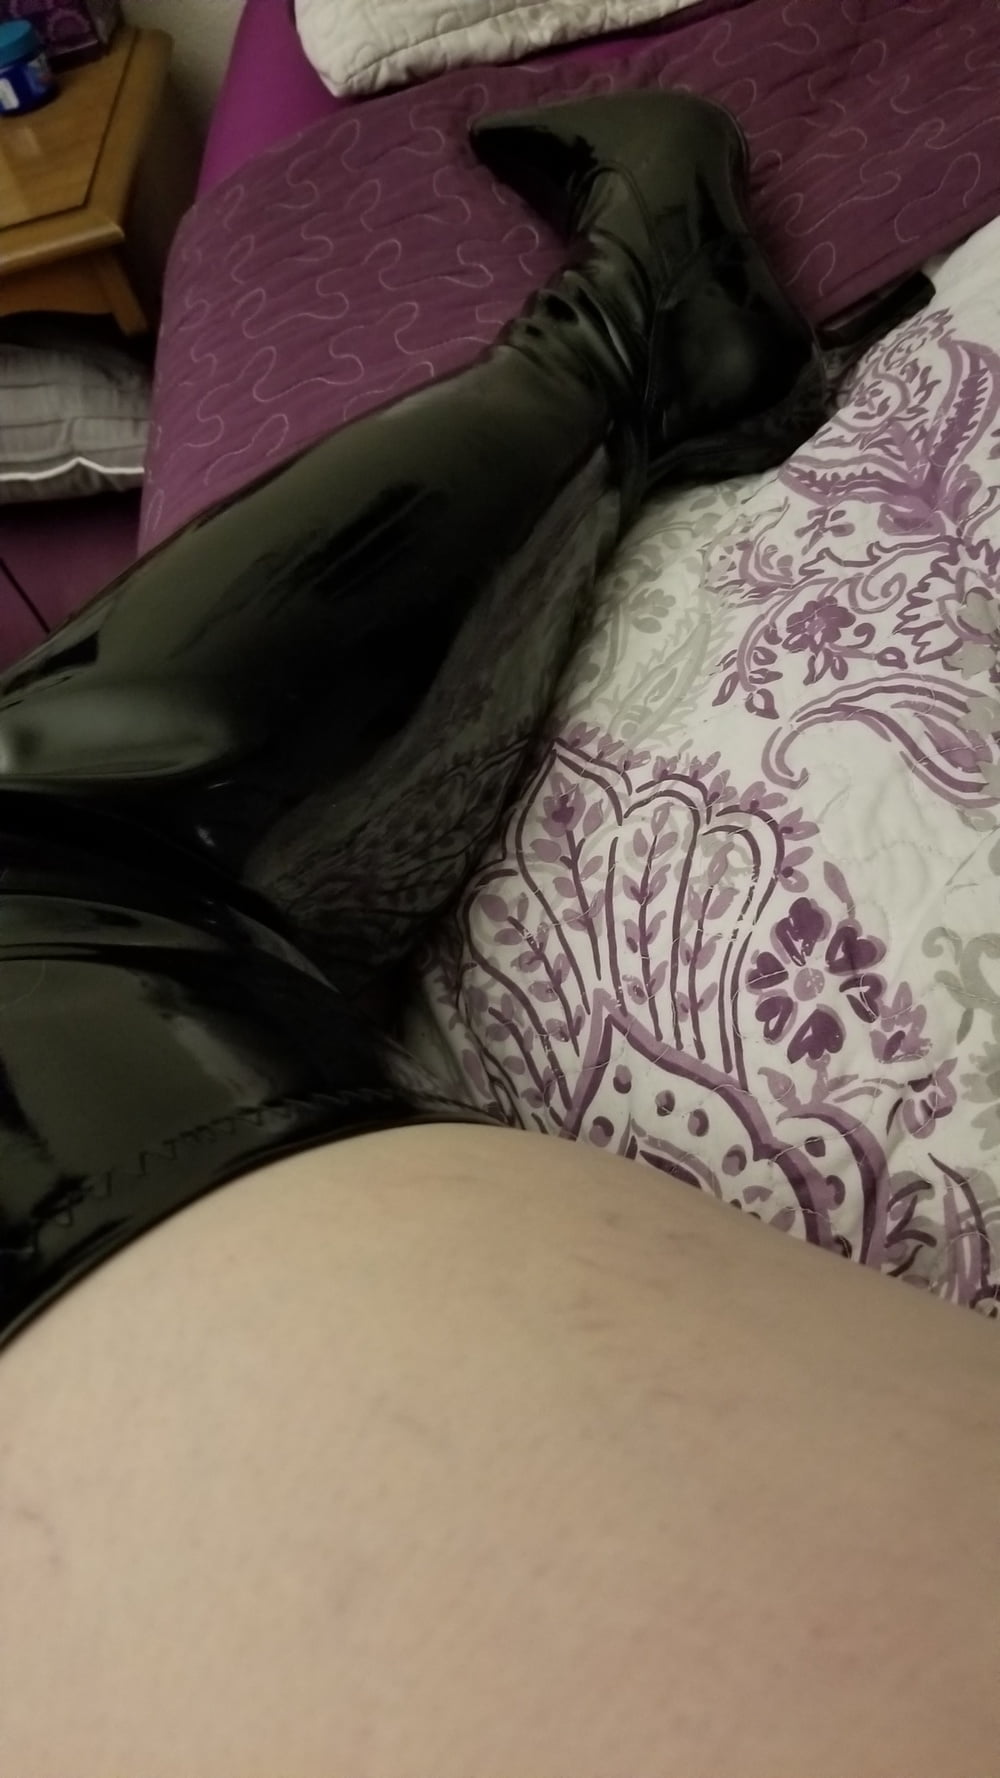 Hubby home early surprised to find wife in thighhigh boots #107163431